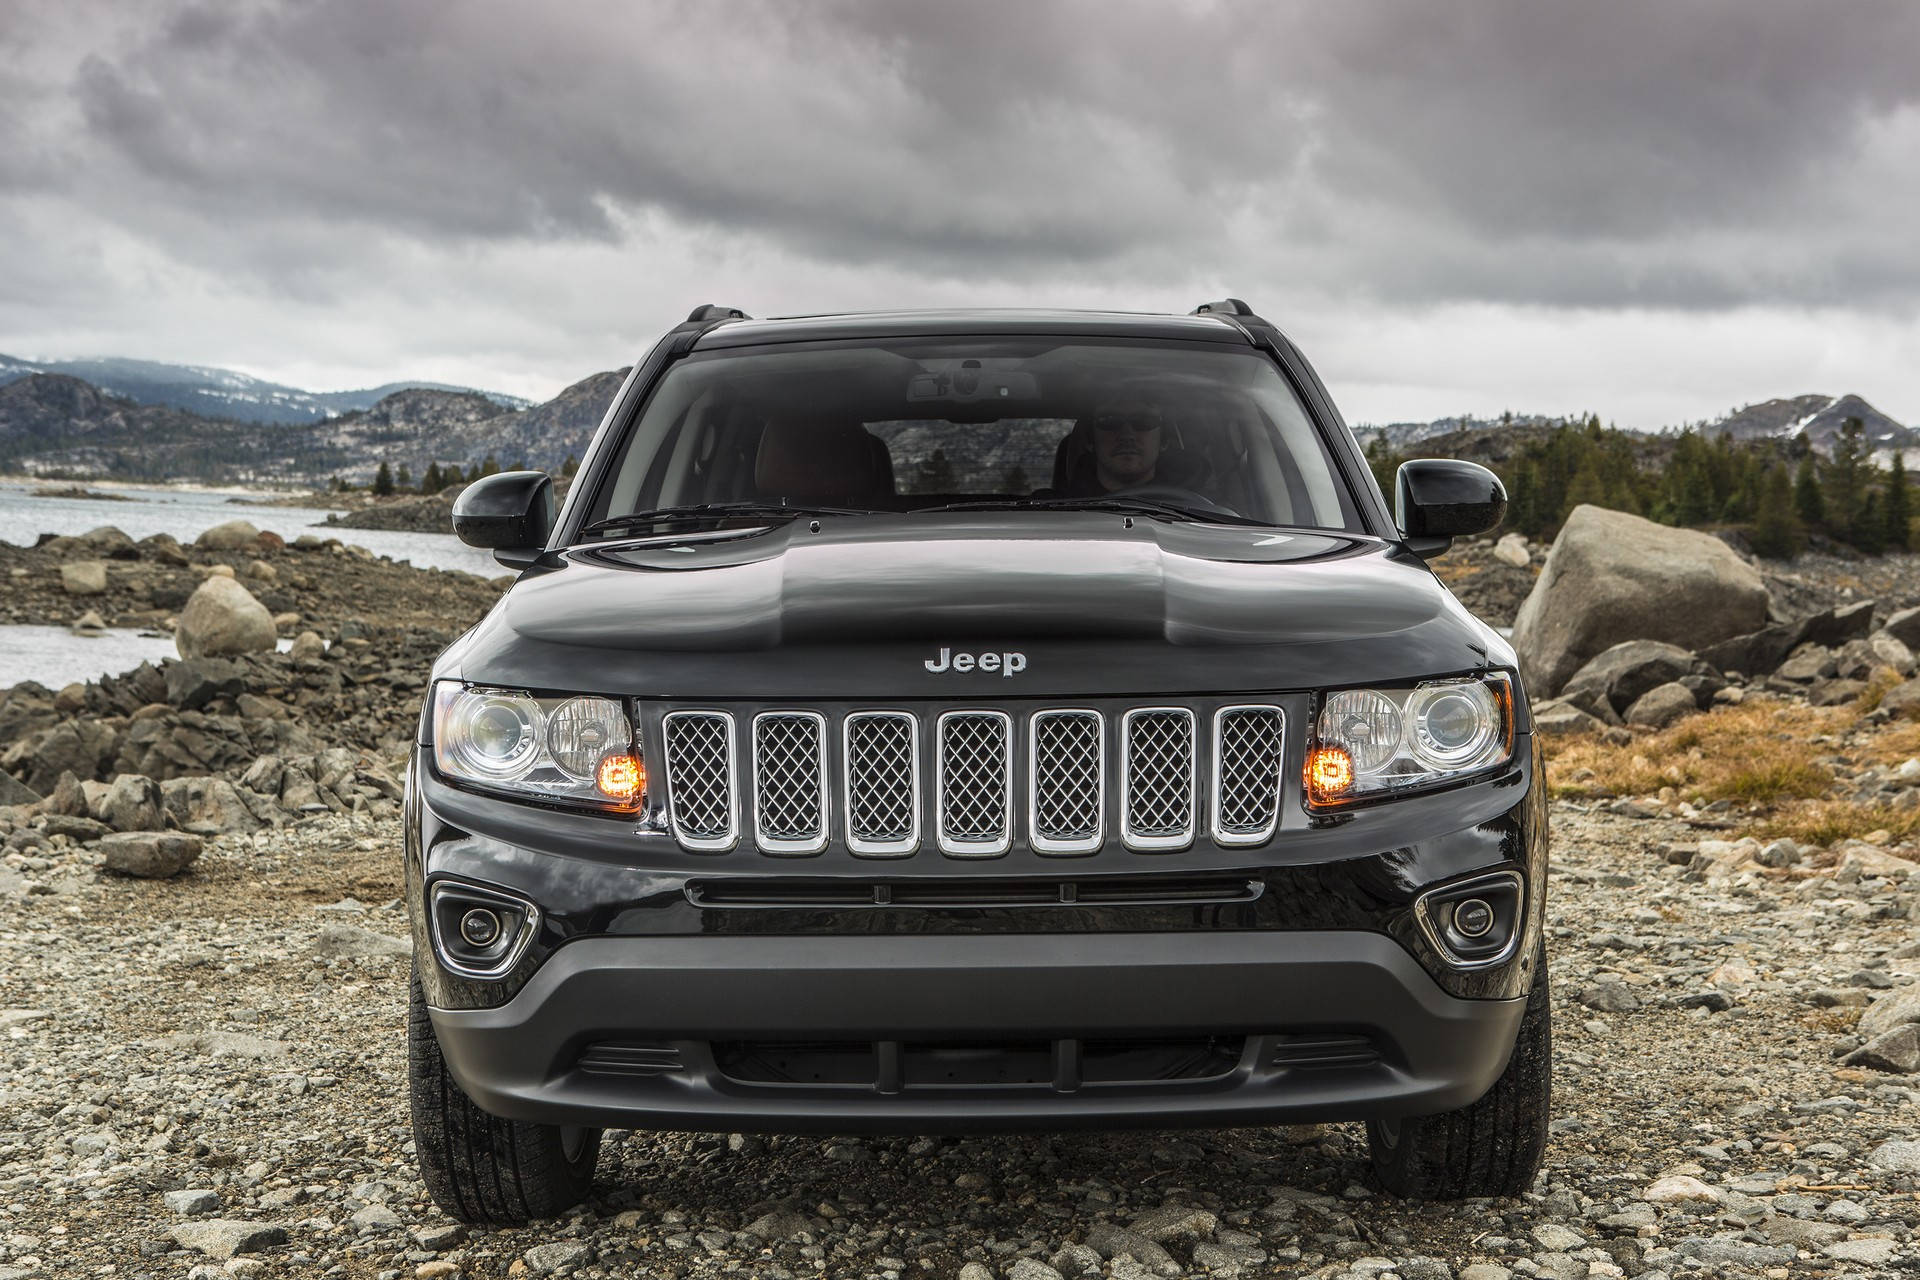 Robust Adventure with Jeep Compass Wallpaper